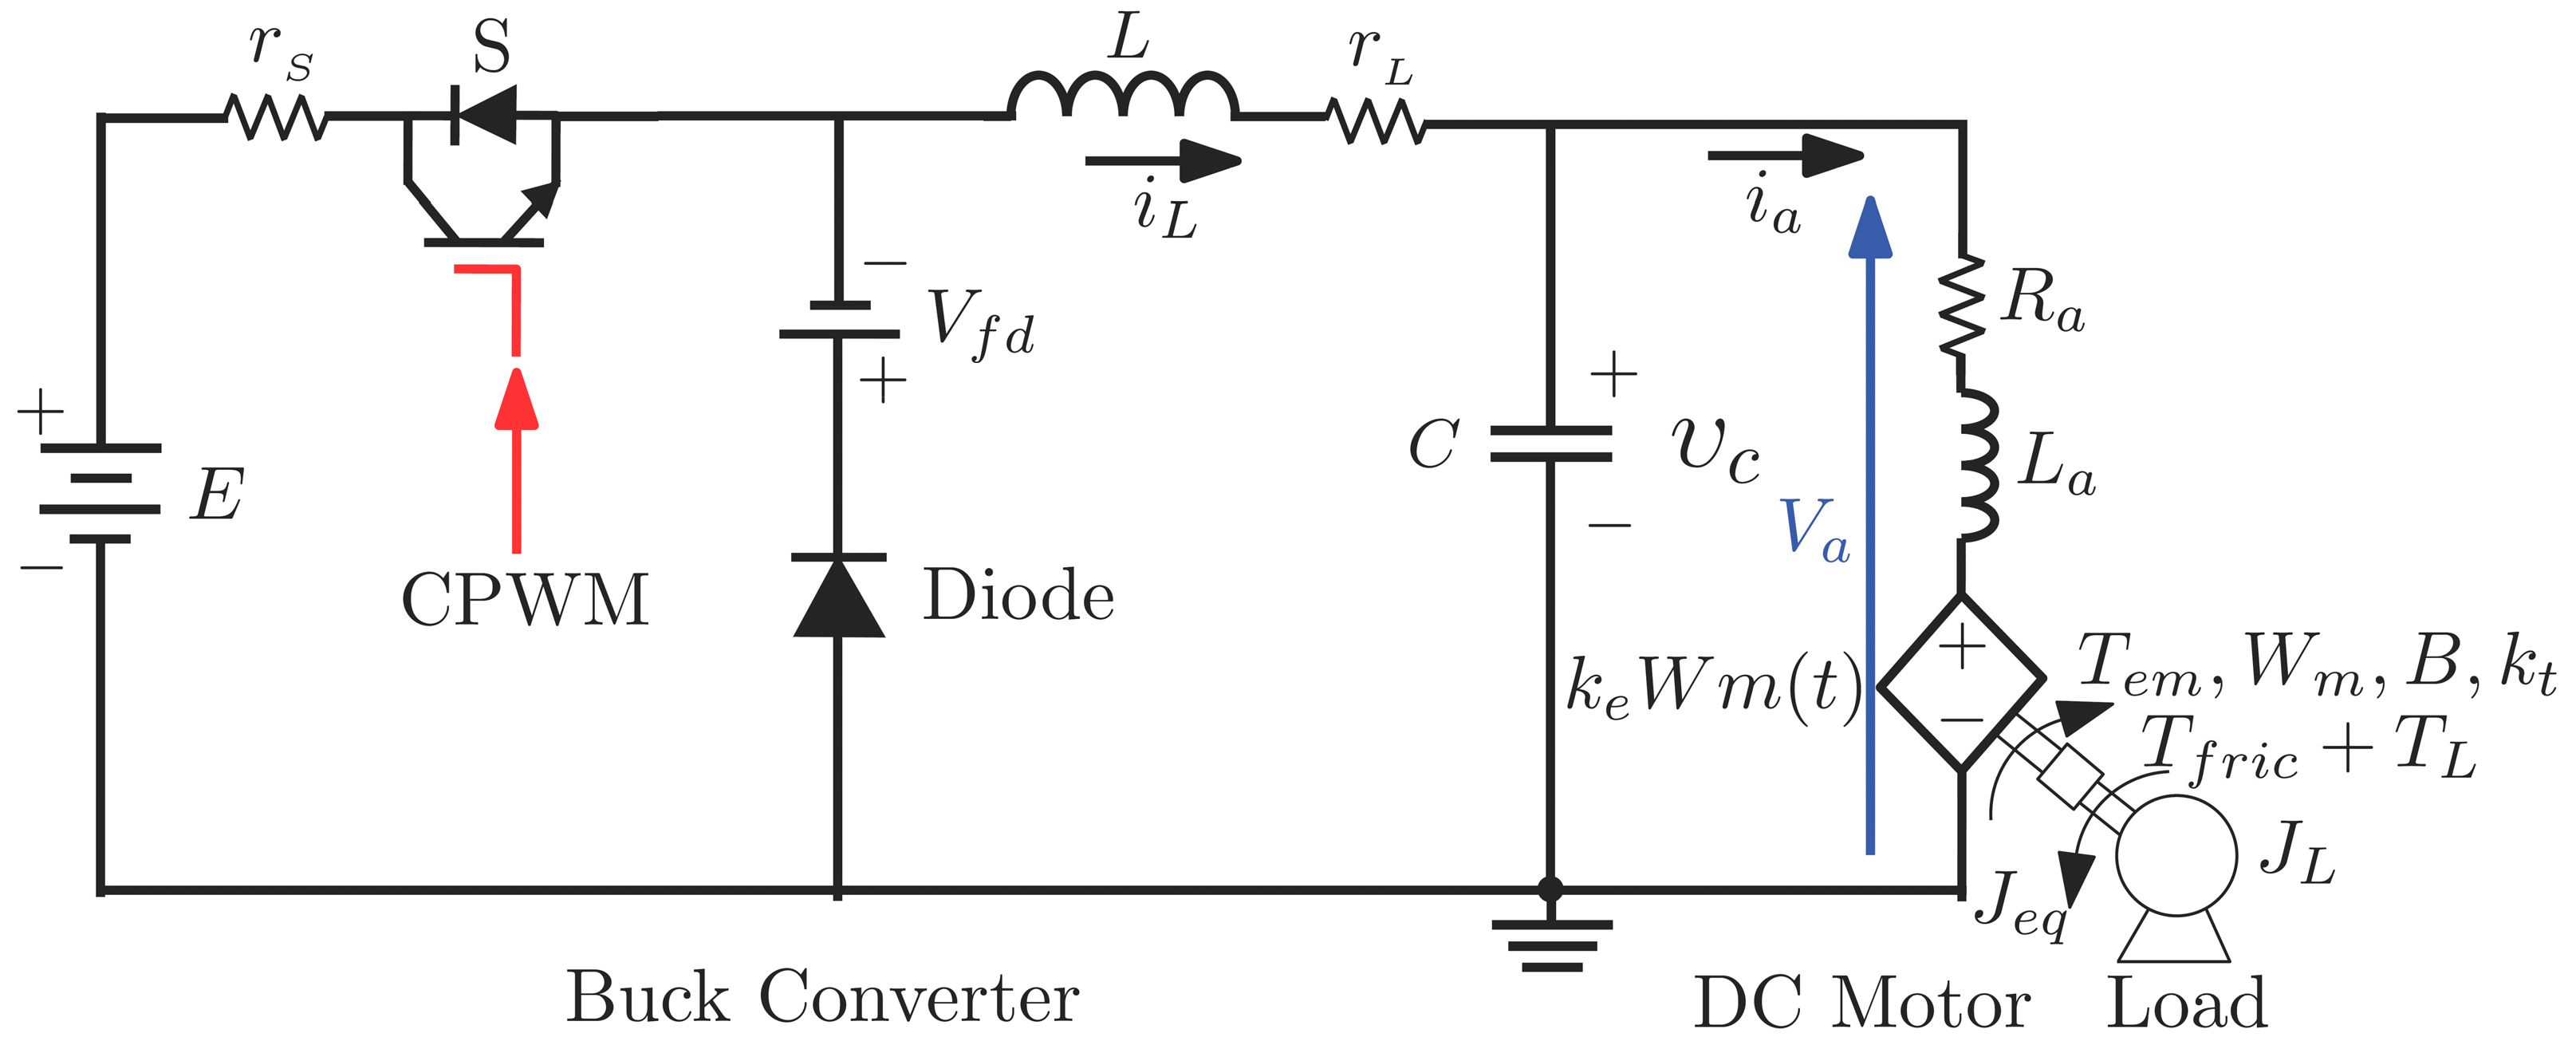 Applied Sciences | Free Full-Text | Application of Zero Average Dynamics  and Fixed Point Induction Control Techniques to Control the Speed of a DC  Motor with a Buck Converter | HTML